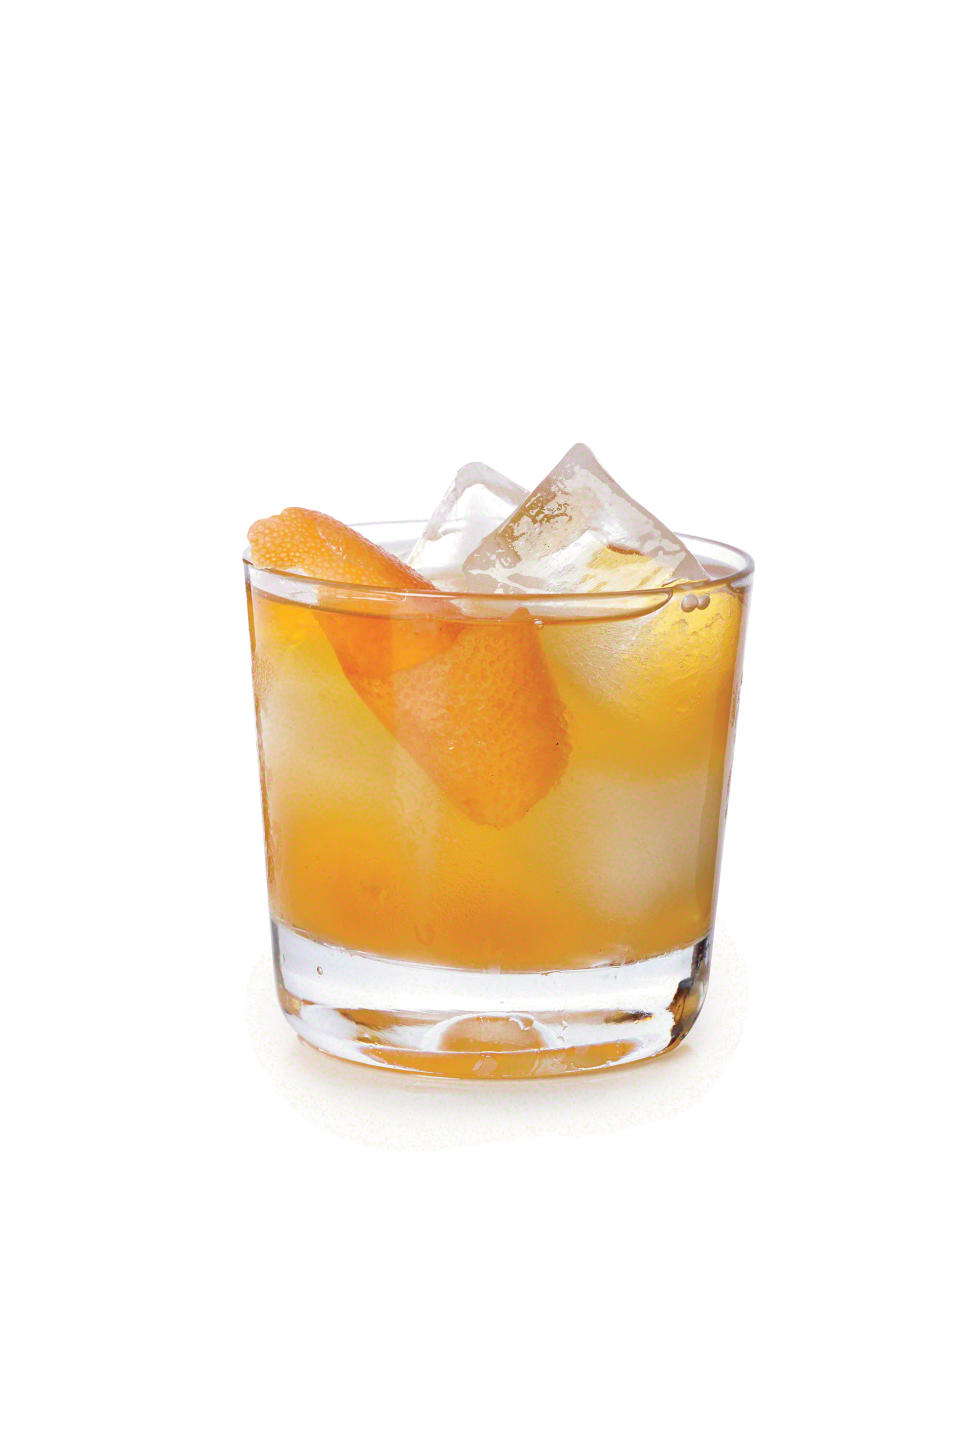 Maple Old-Fashioned